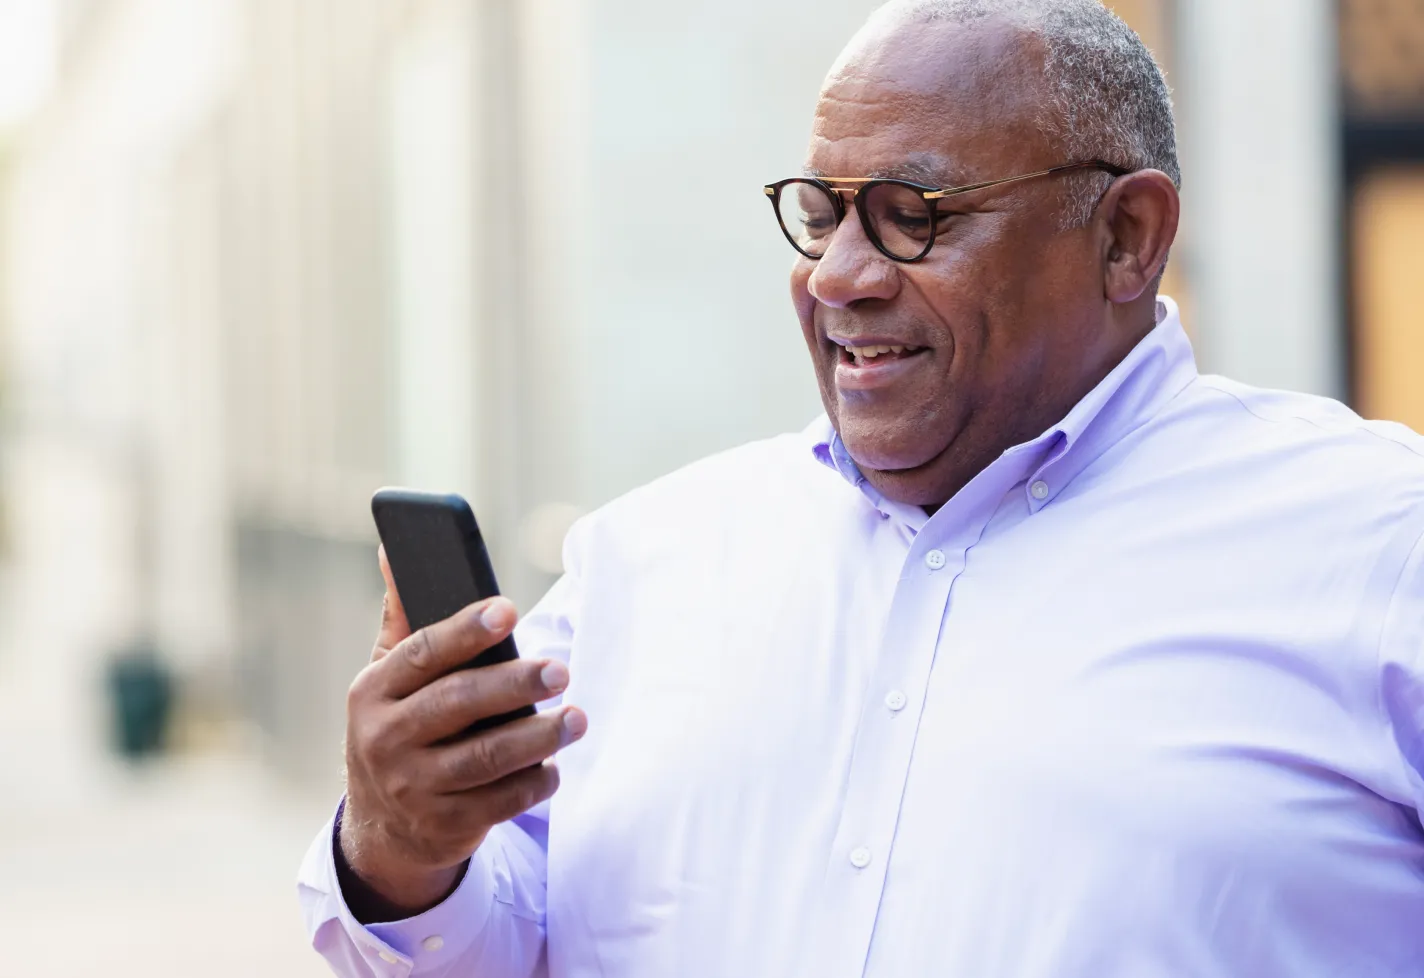 A mature man is standing, smiling, and reviewing information on his smartphone.